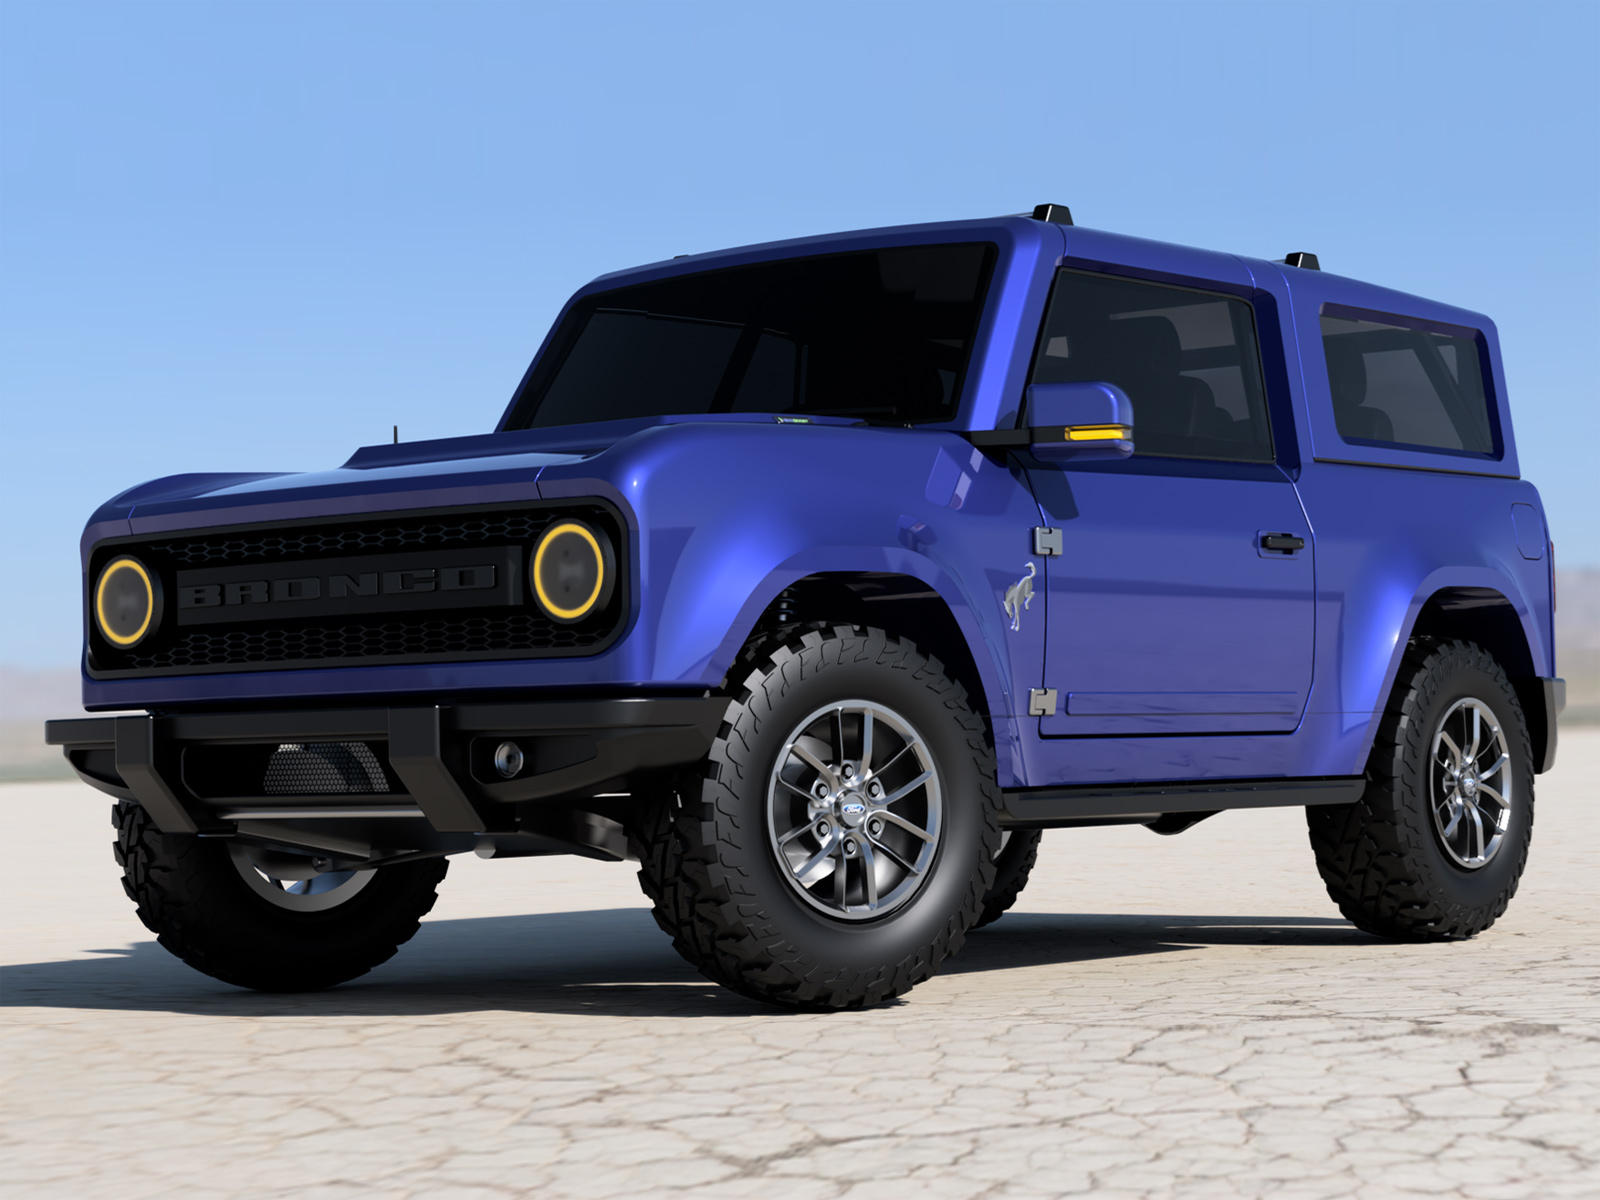 2021 Ford Bronco This Is Where And When It Will Be Revealed Carbuzz